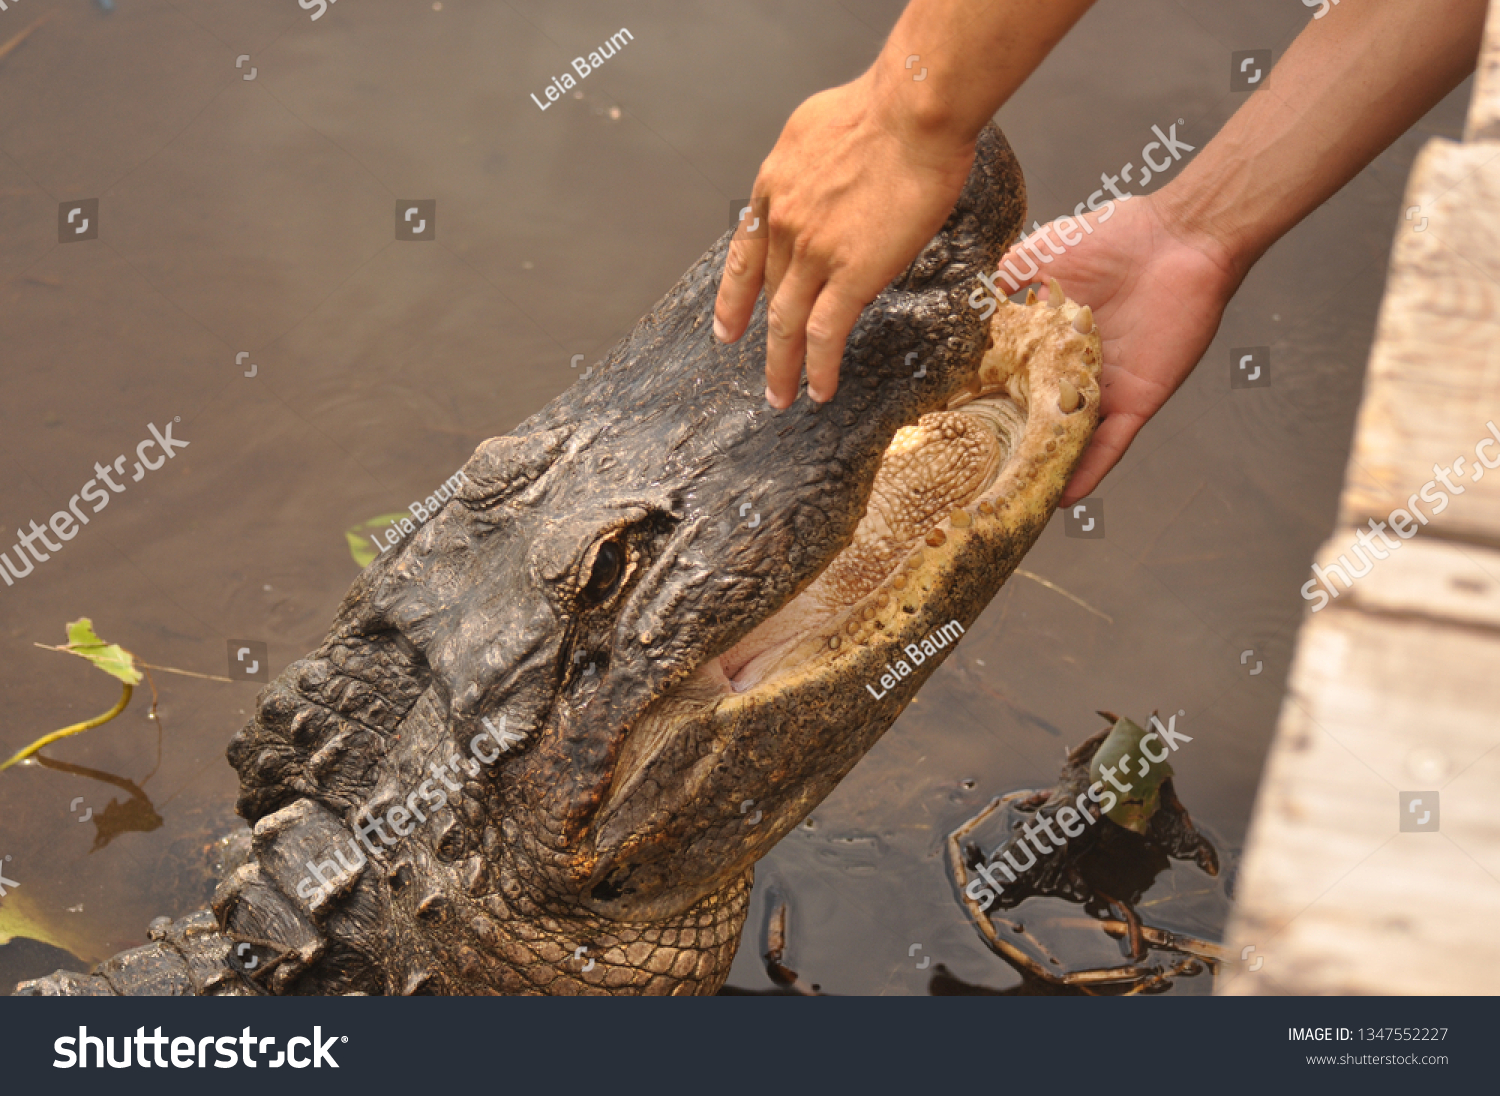 Hands touching the crocodile mouth #1347552227